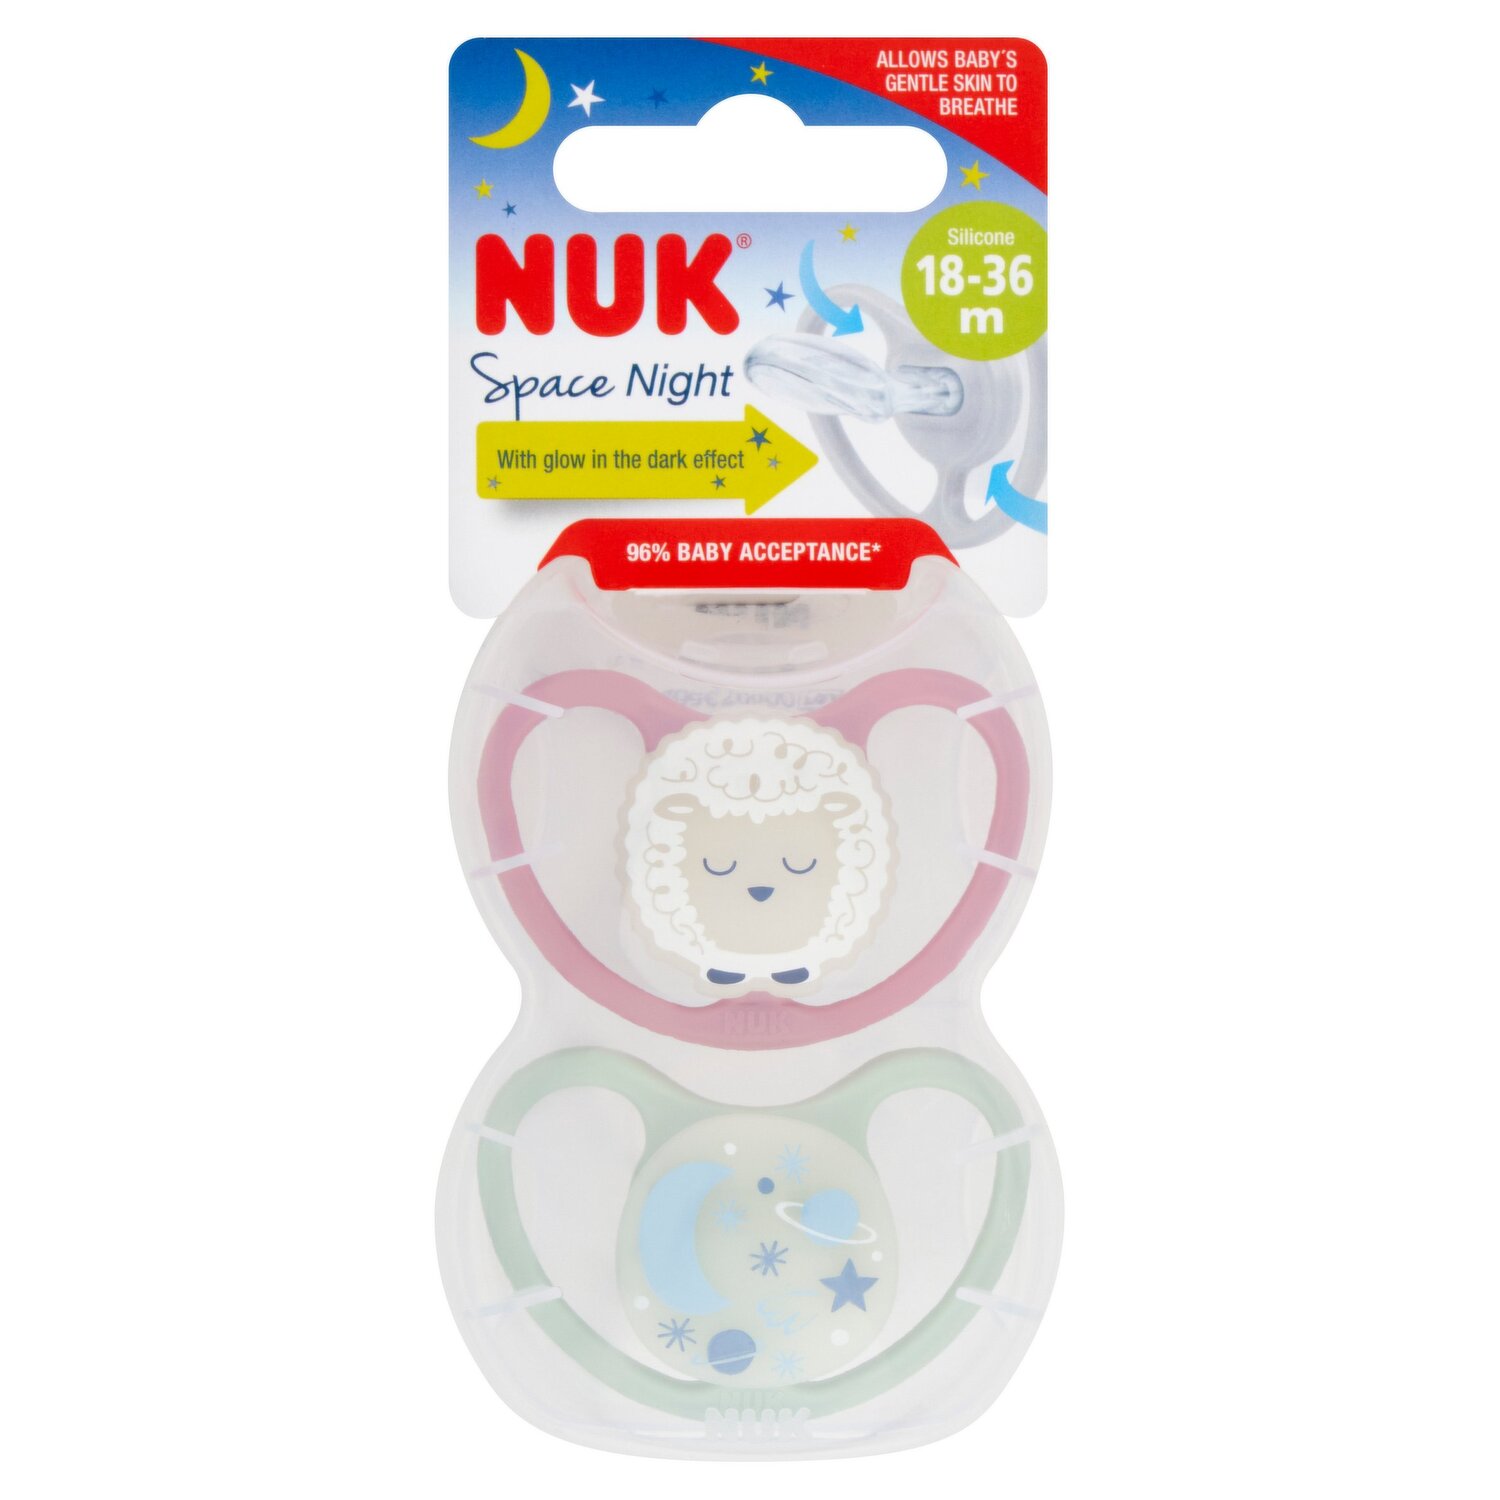 NUK for NATURE teat pacifier silicone 18-36 months. Green x 2